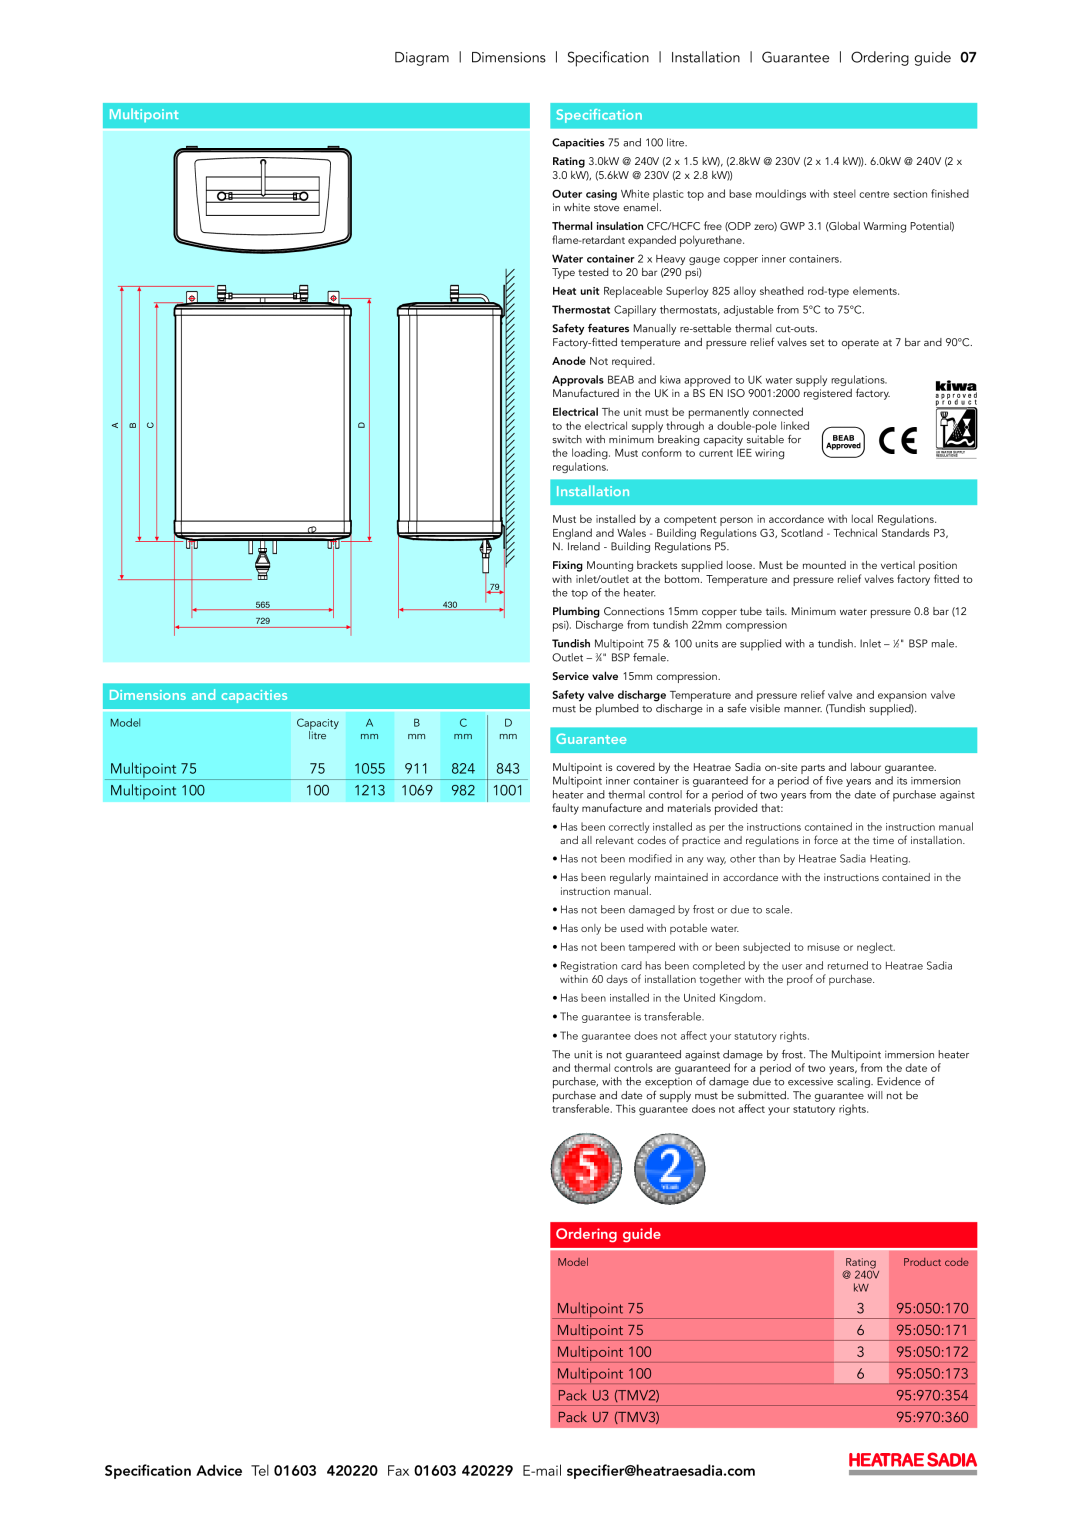 Hotpoint 75/100 manual Multipoint, Specification, Installation, Dimensions and capacities, Guarantee, Ordering guide 